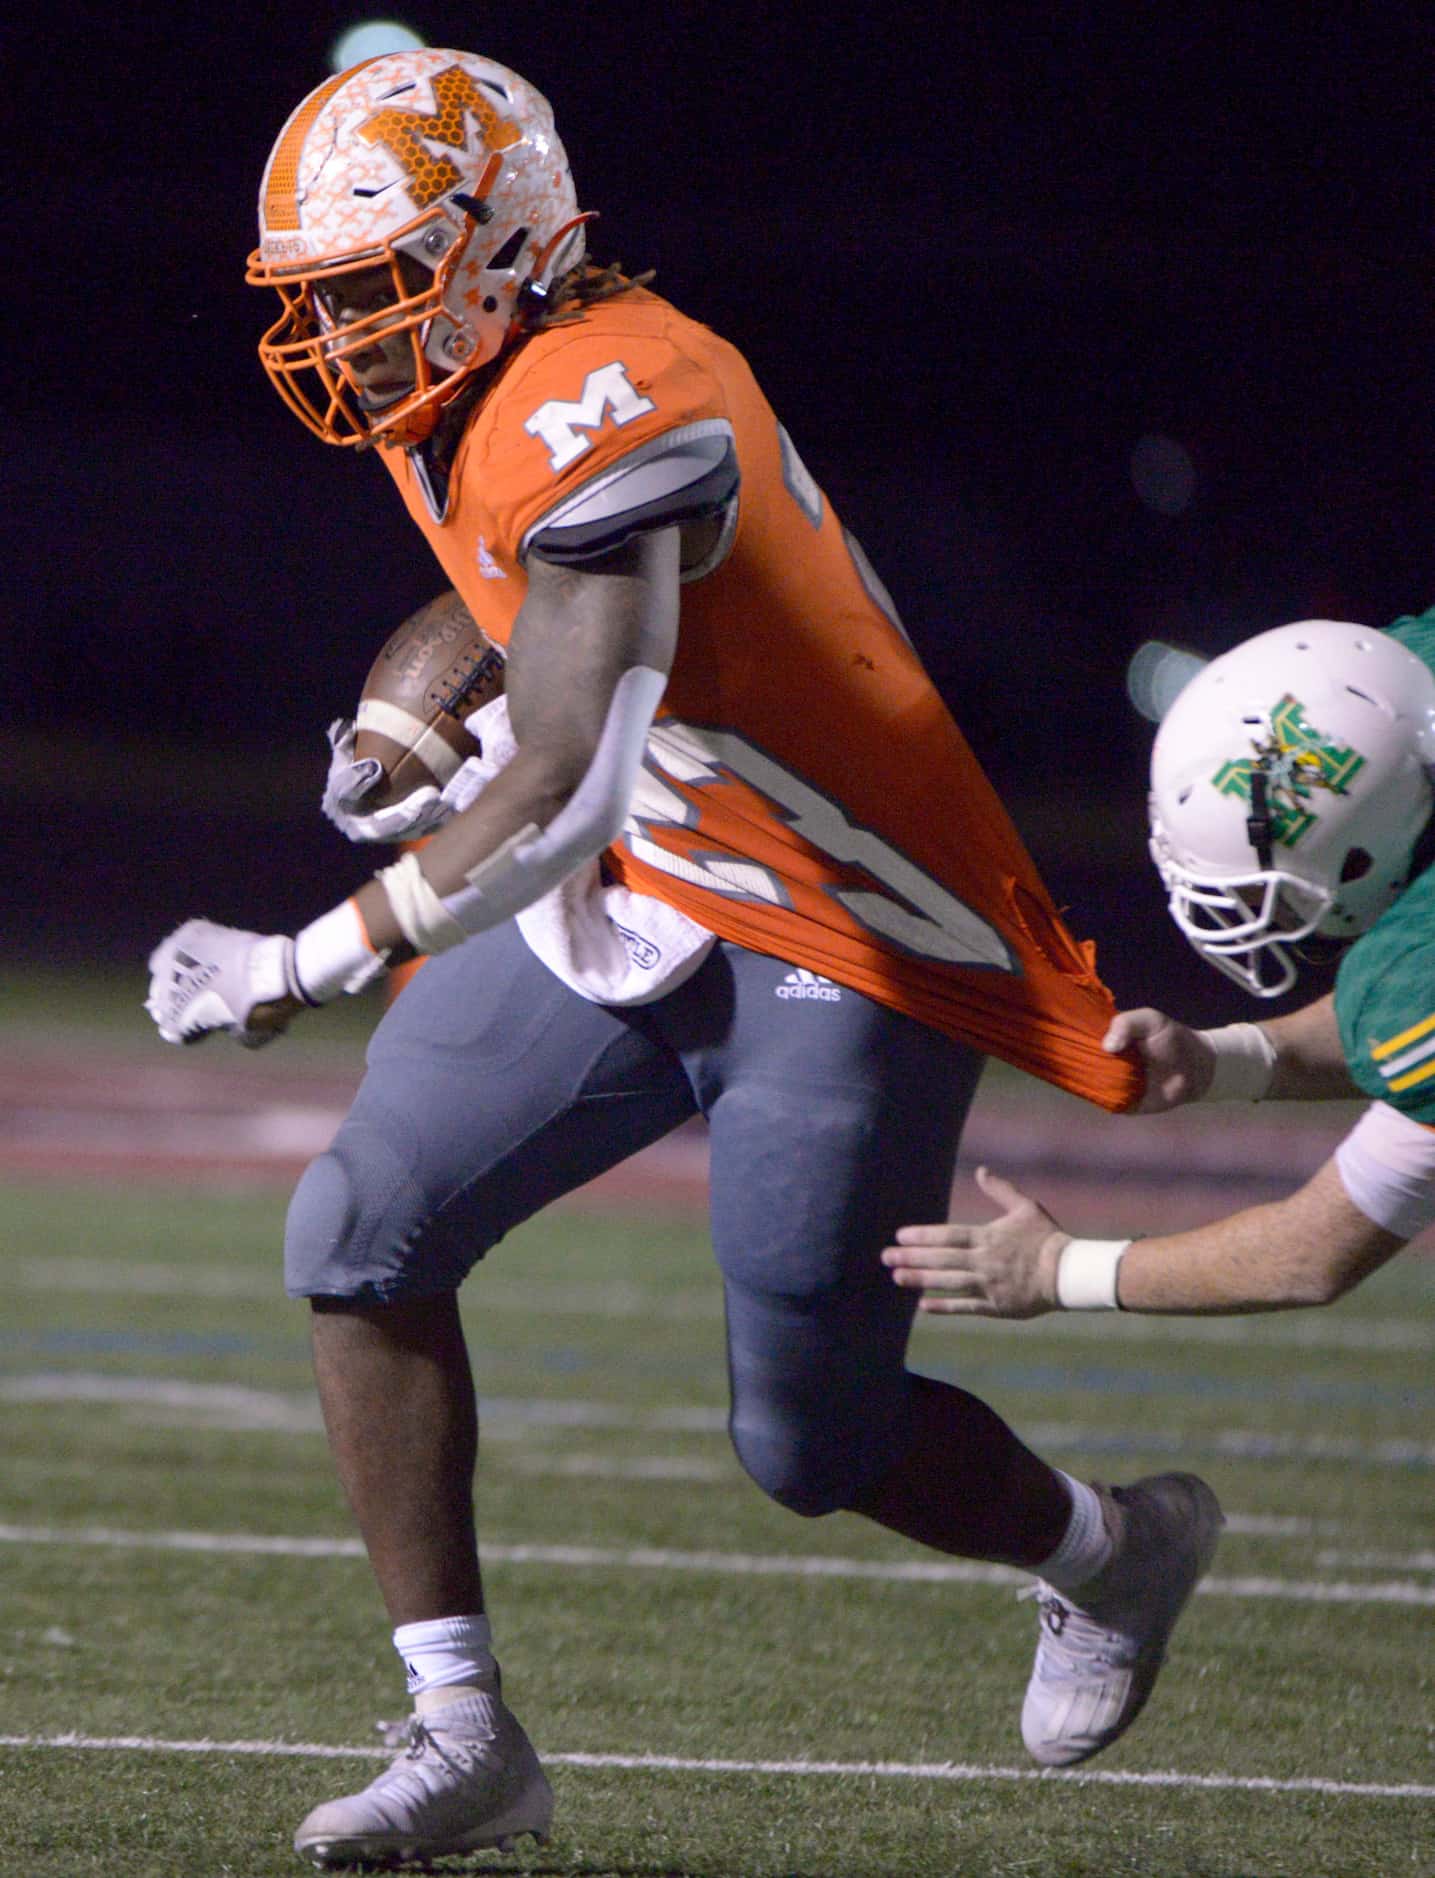 Mineola’s Trevion Sneed tries to run through a tackle attempt by Cedric Moore in the third...